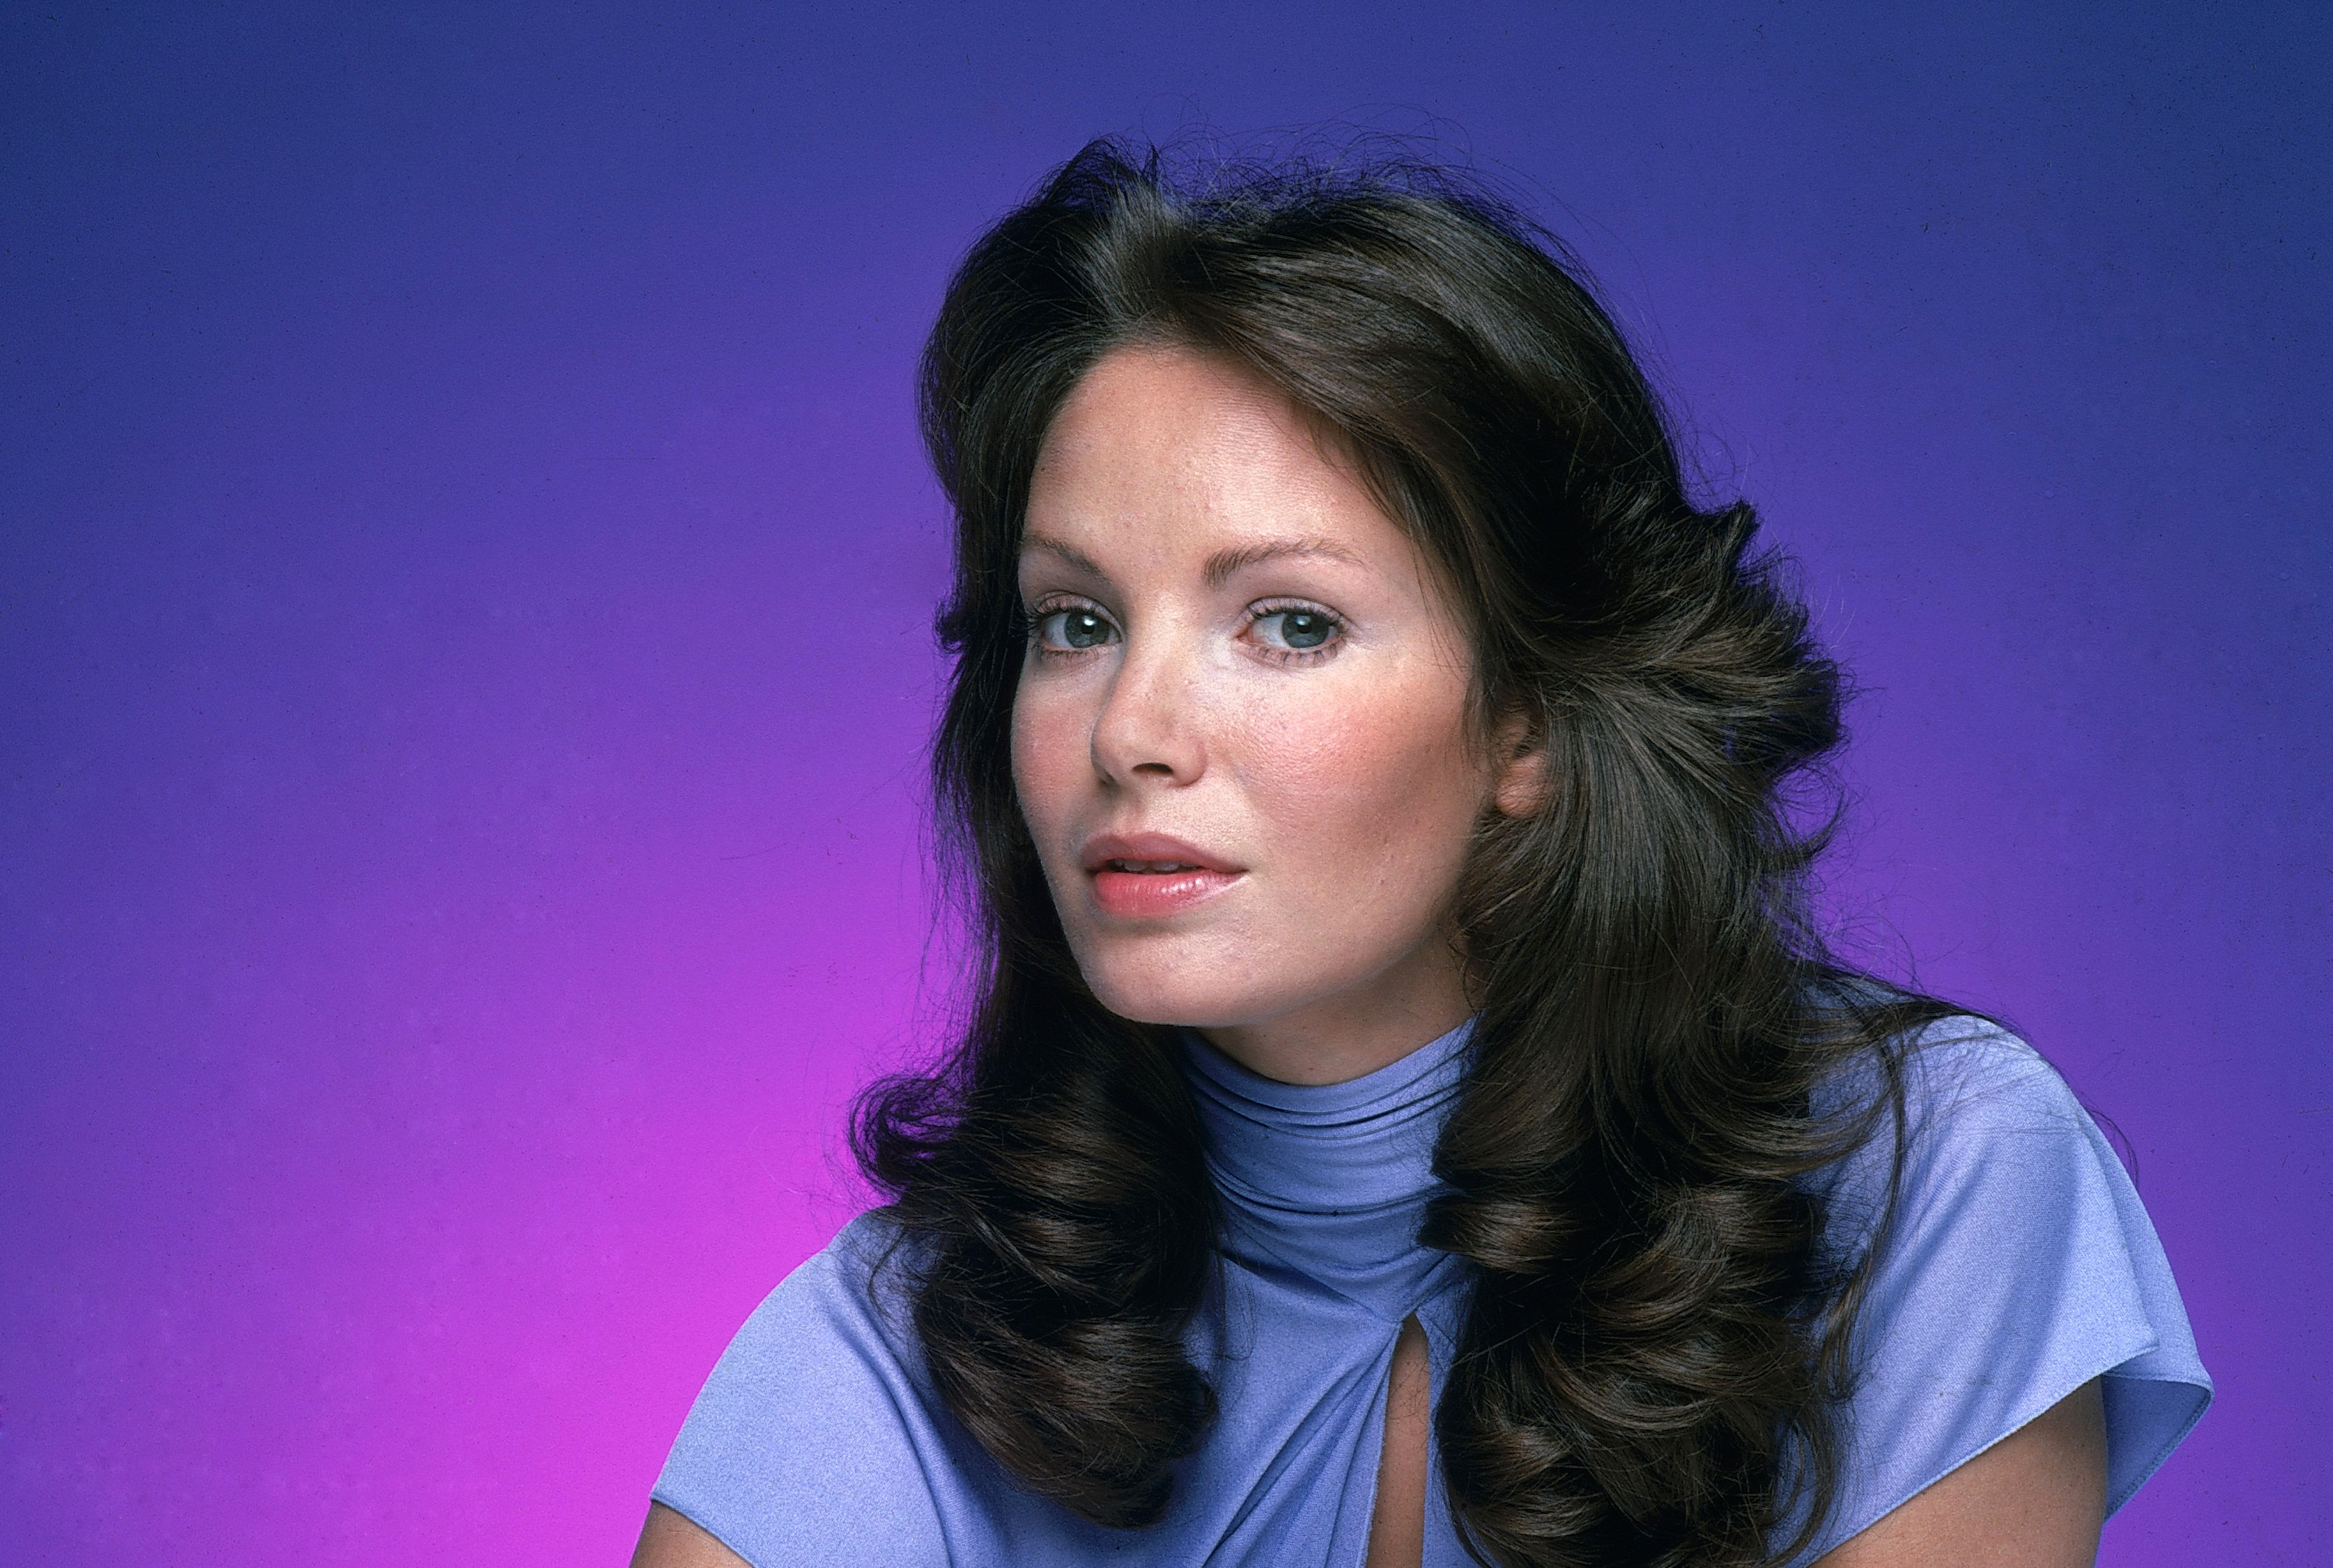 jaclyn smith HD wallpapers, backgrounds.